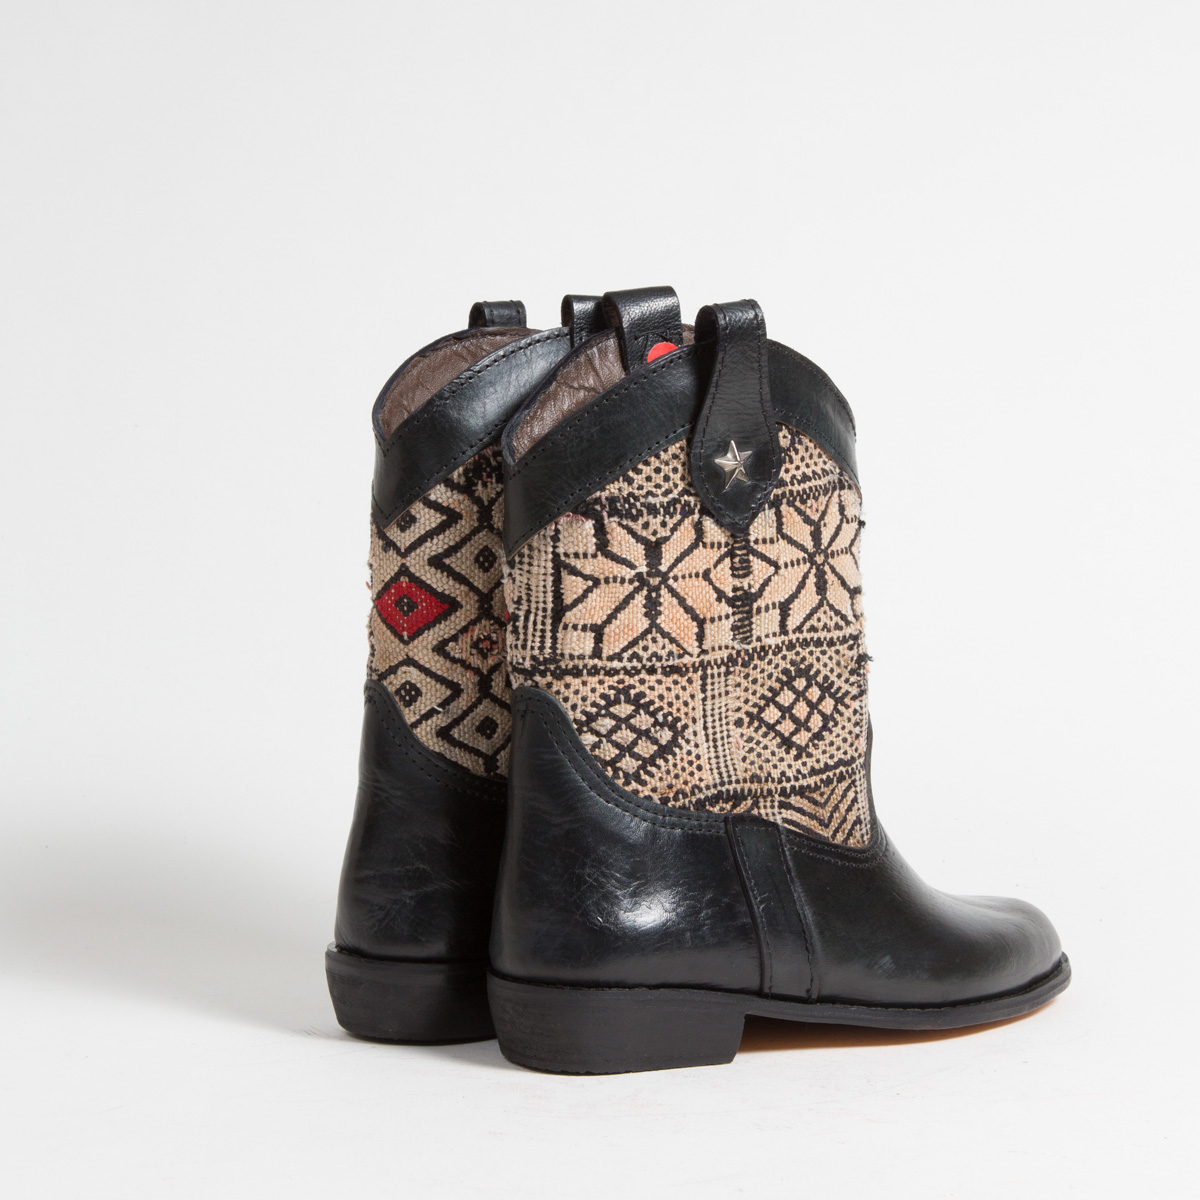 Bottines Kilim cuir mababouche artisanales (Réf. MN6-38)